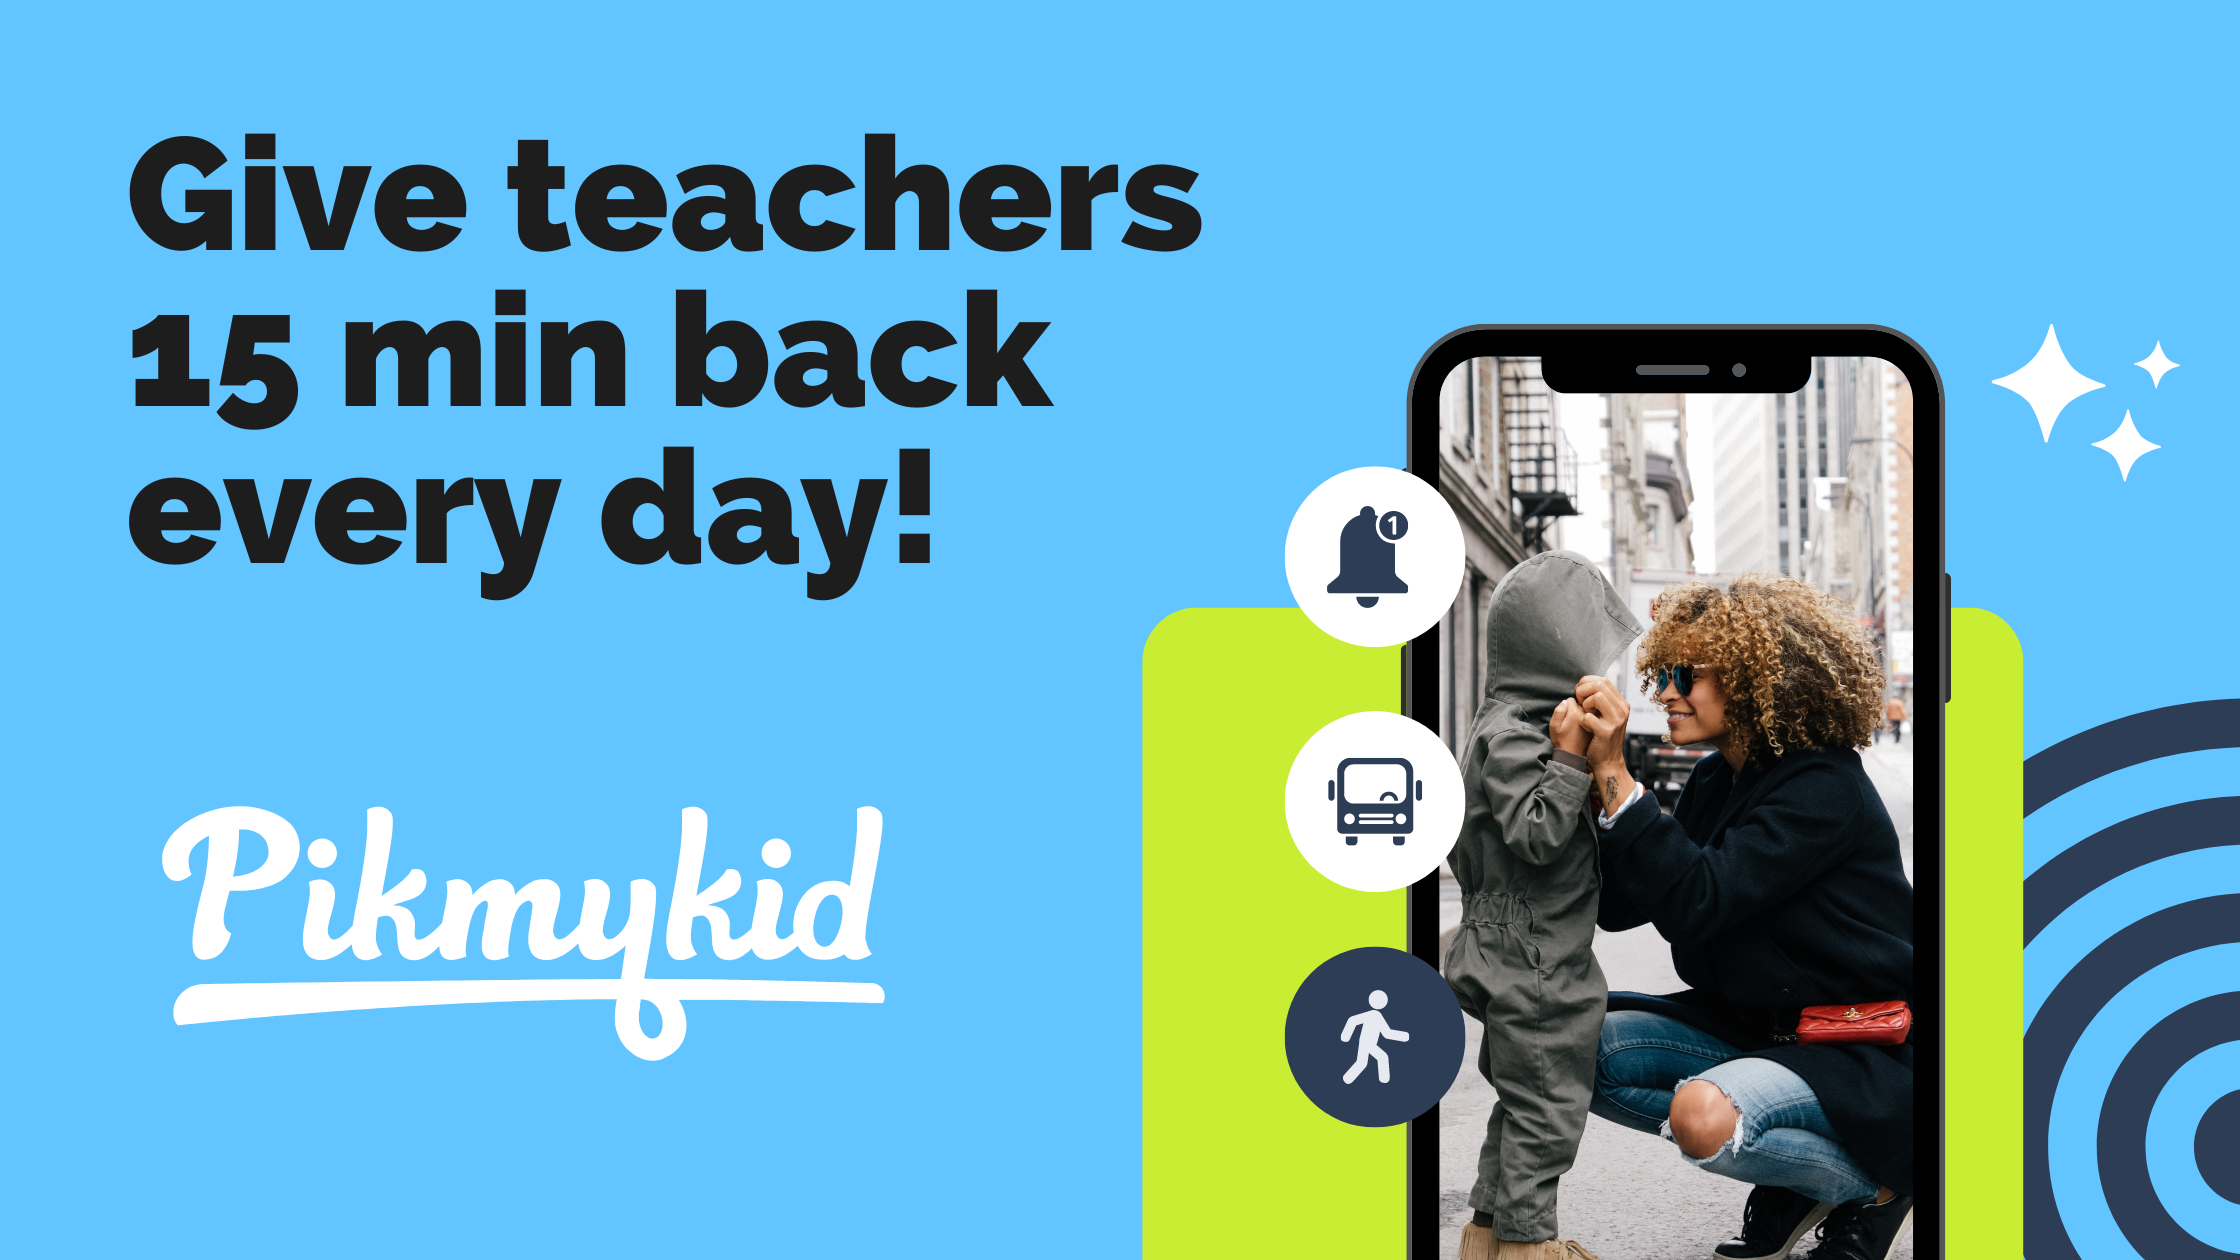 pikmykid helps give teachers 15 min back every day